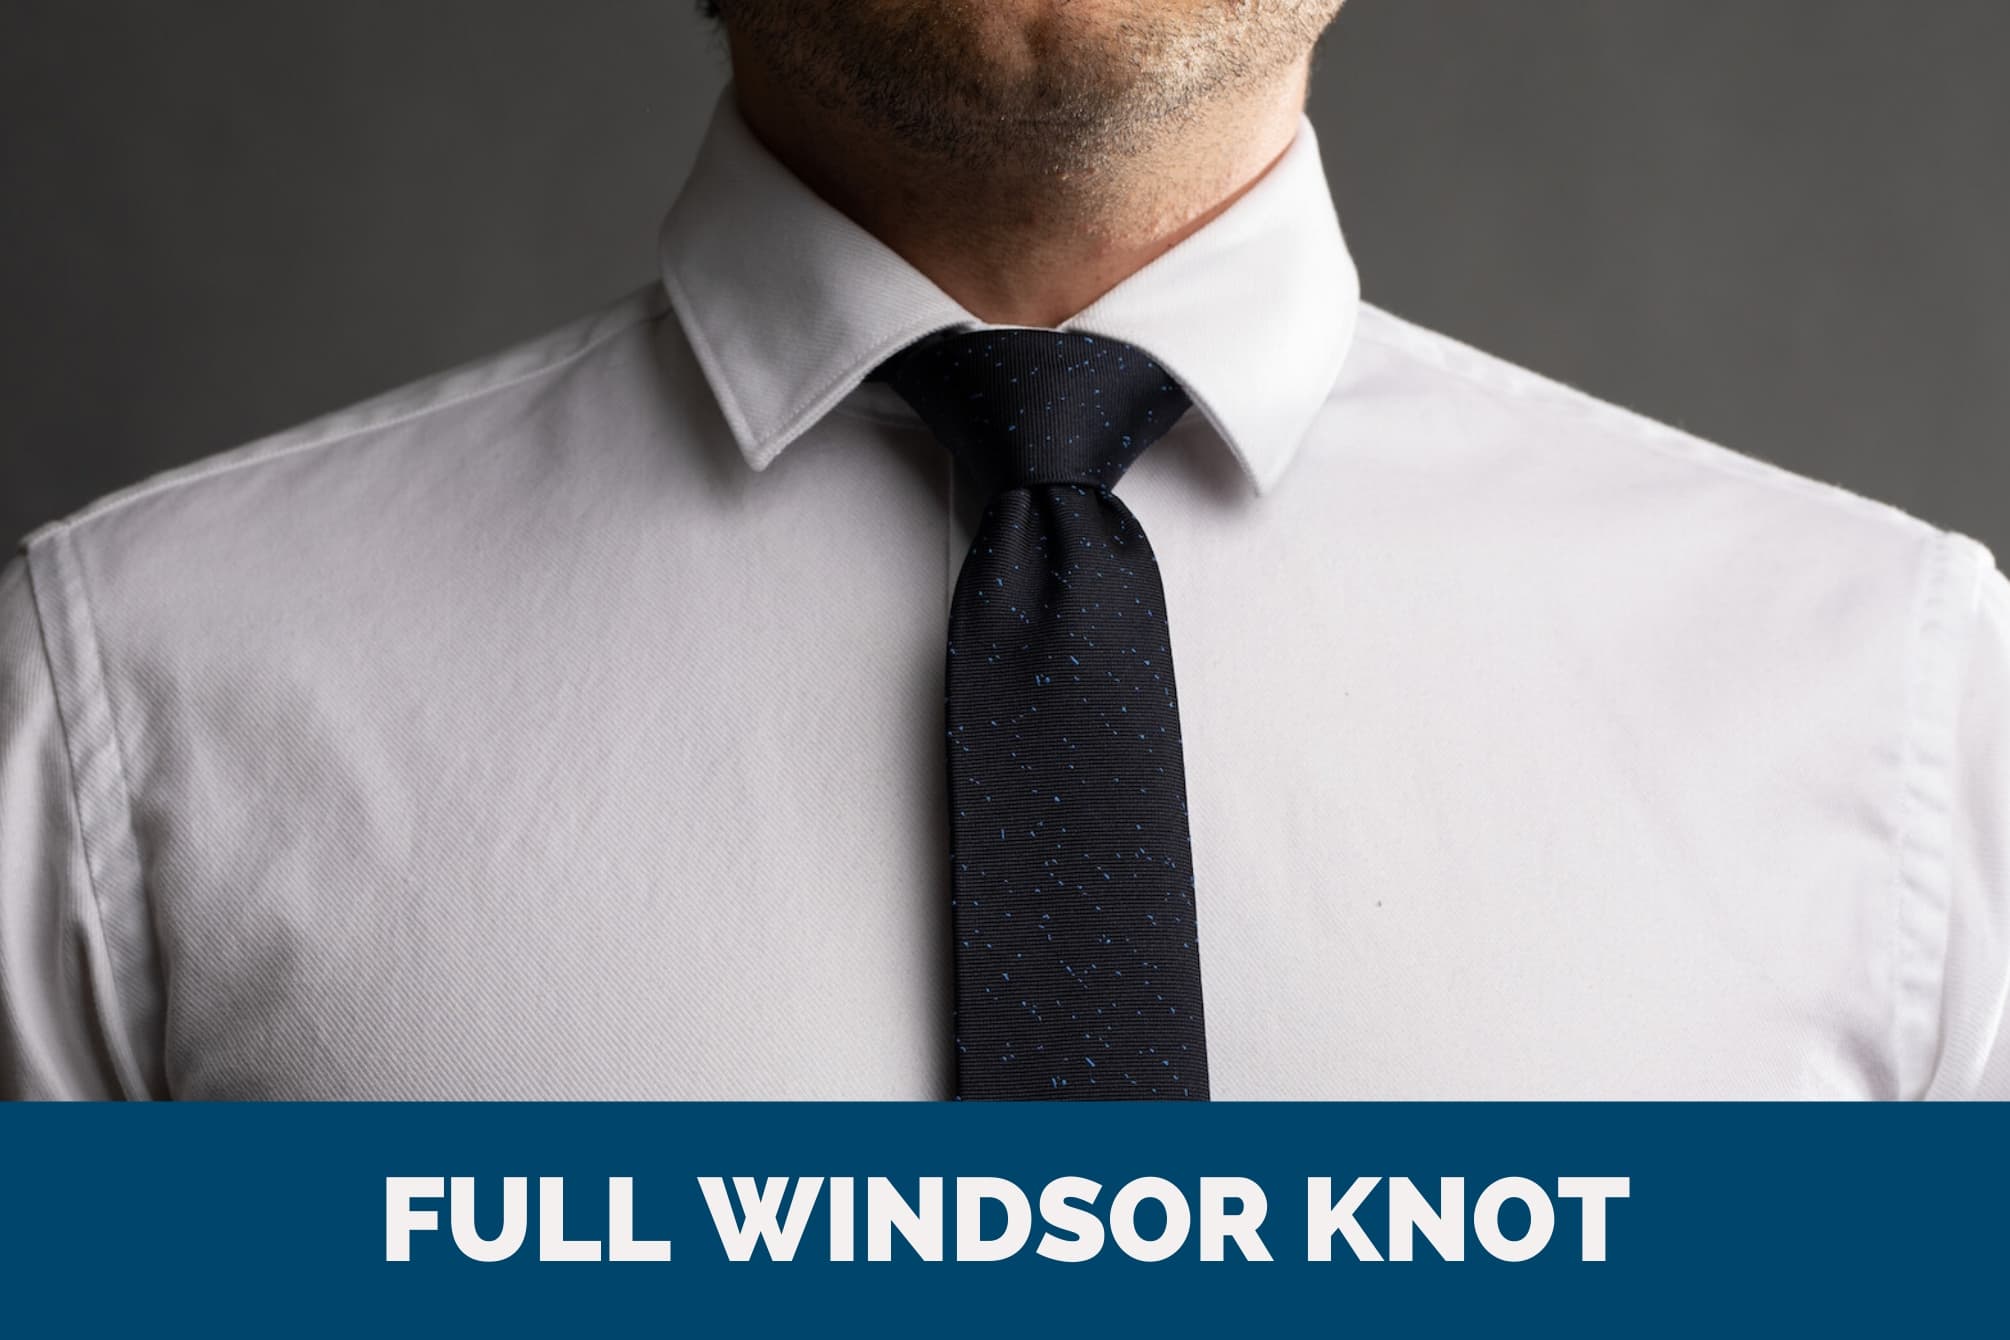 How To Tie The Full Windsor Knot